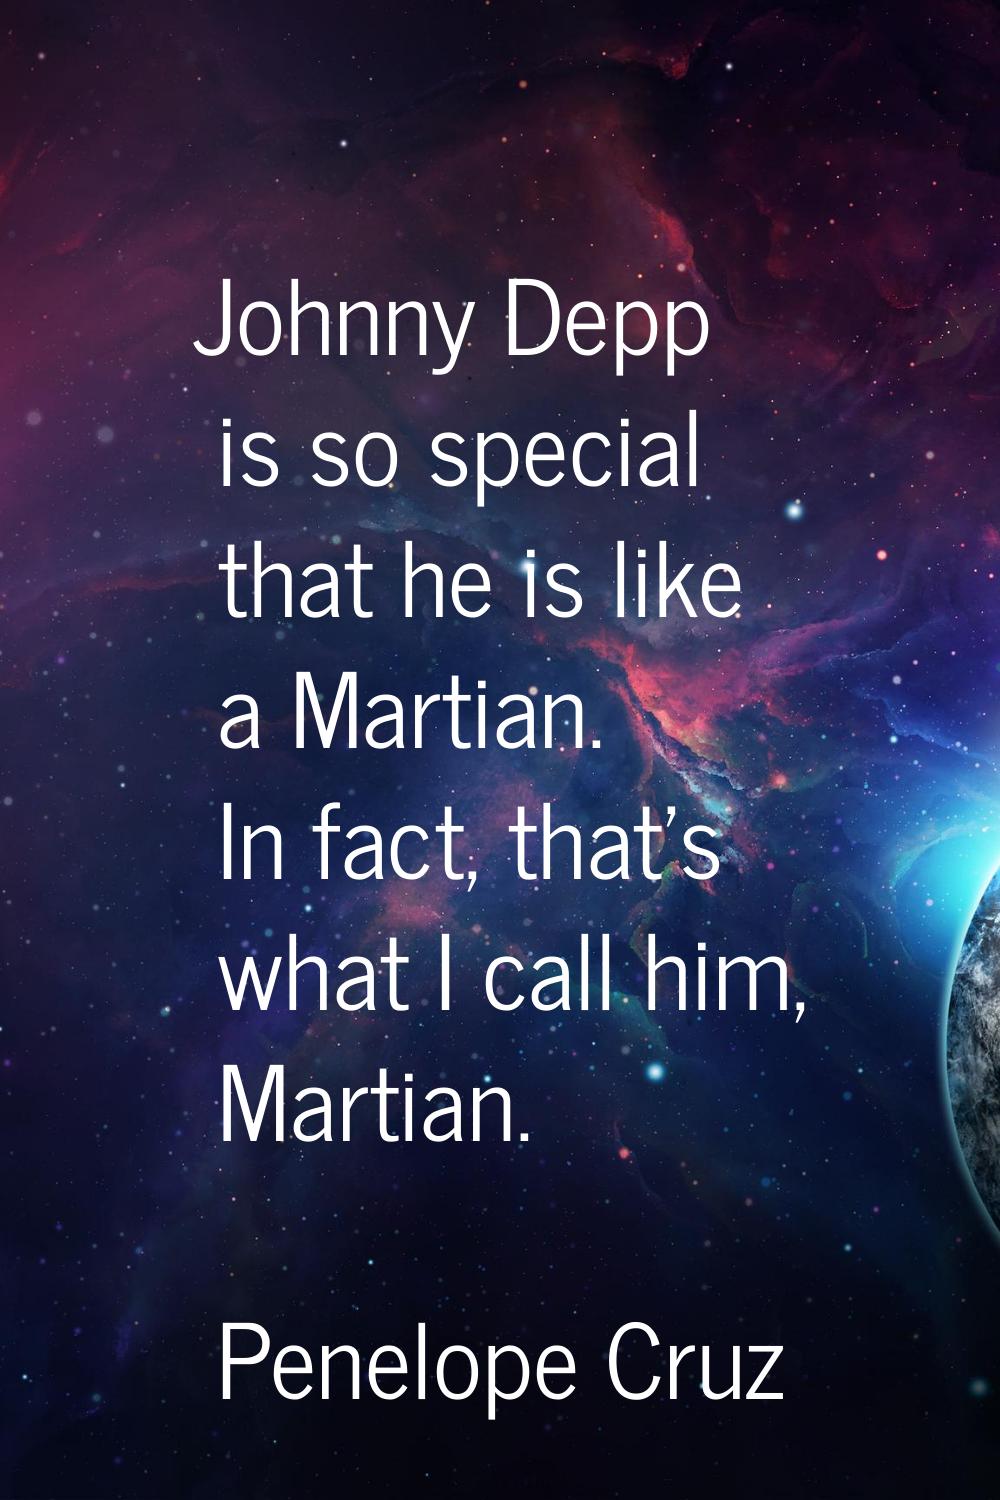 Johnny Depp is so special that he is like a Martian. In fact, that's what I call him, Martian.